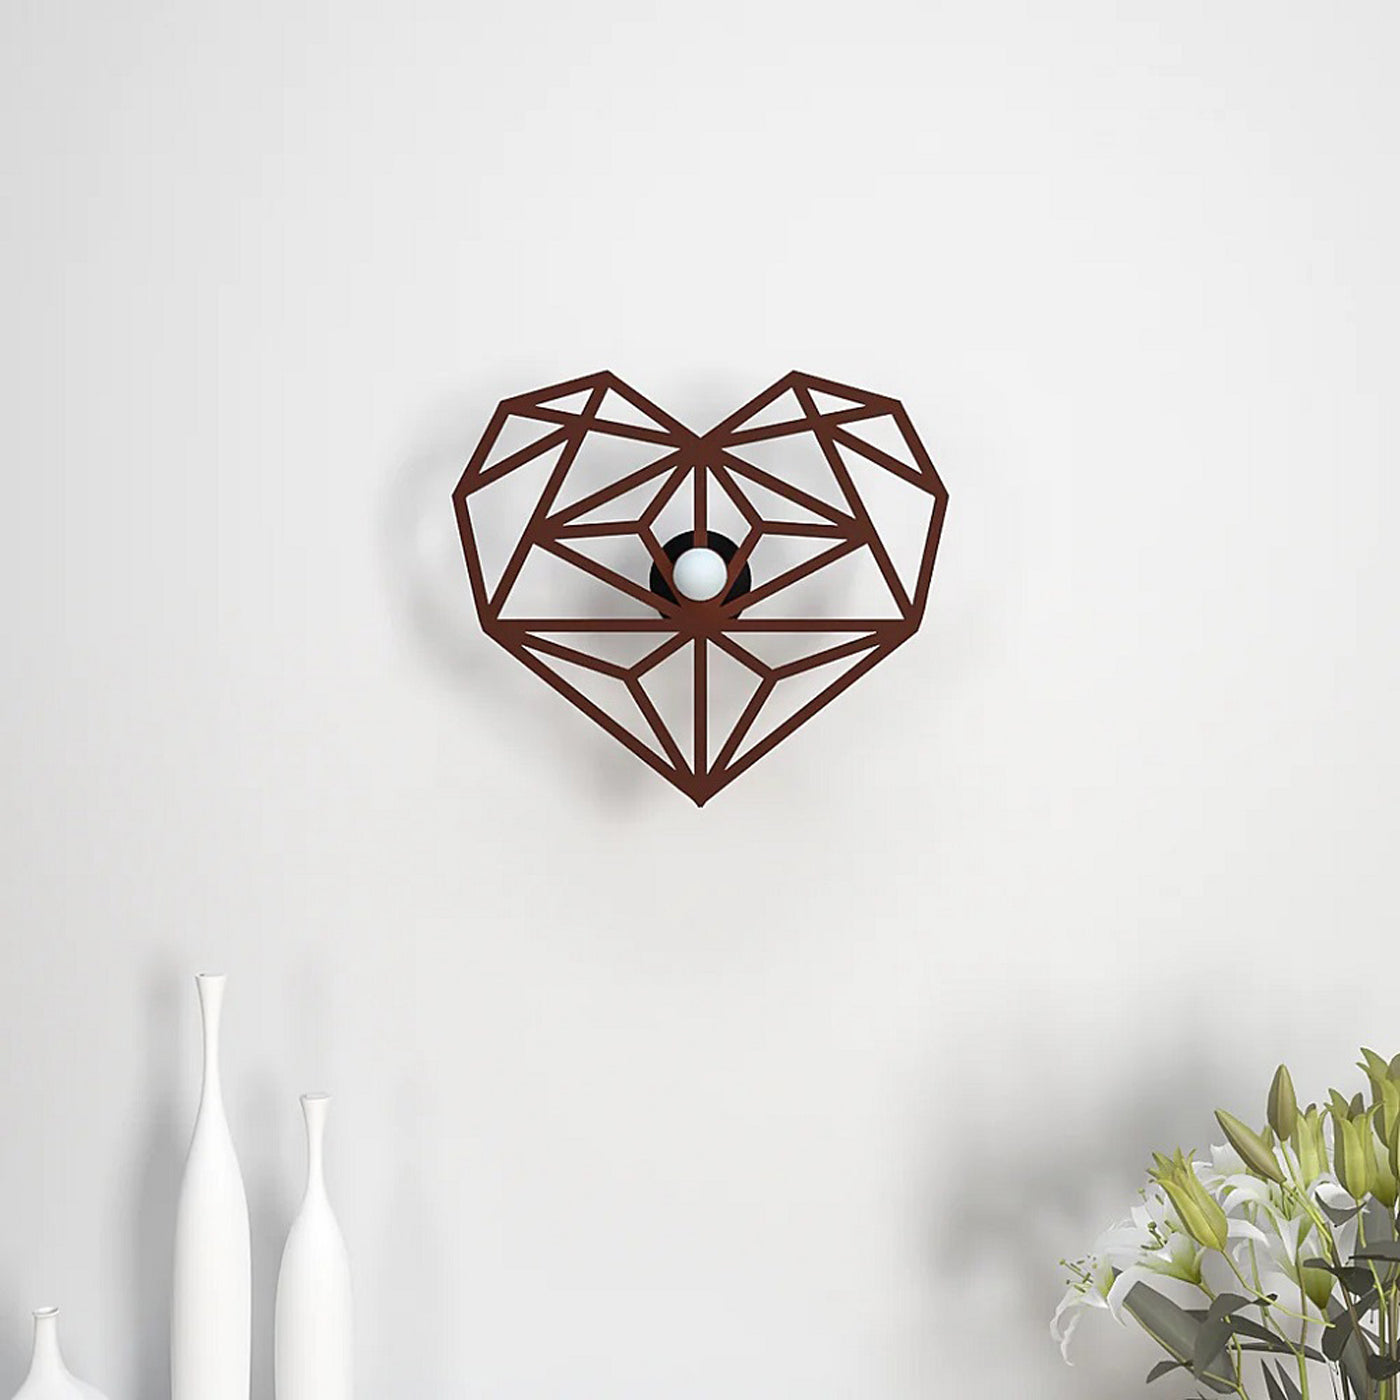 Heart / Dil Shadow Lamp For Home / Office Wall decor